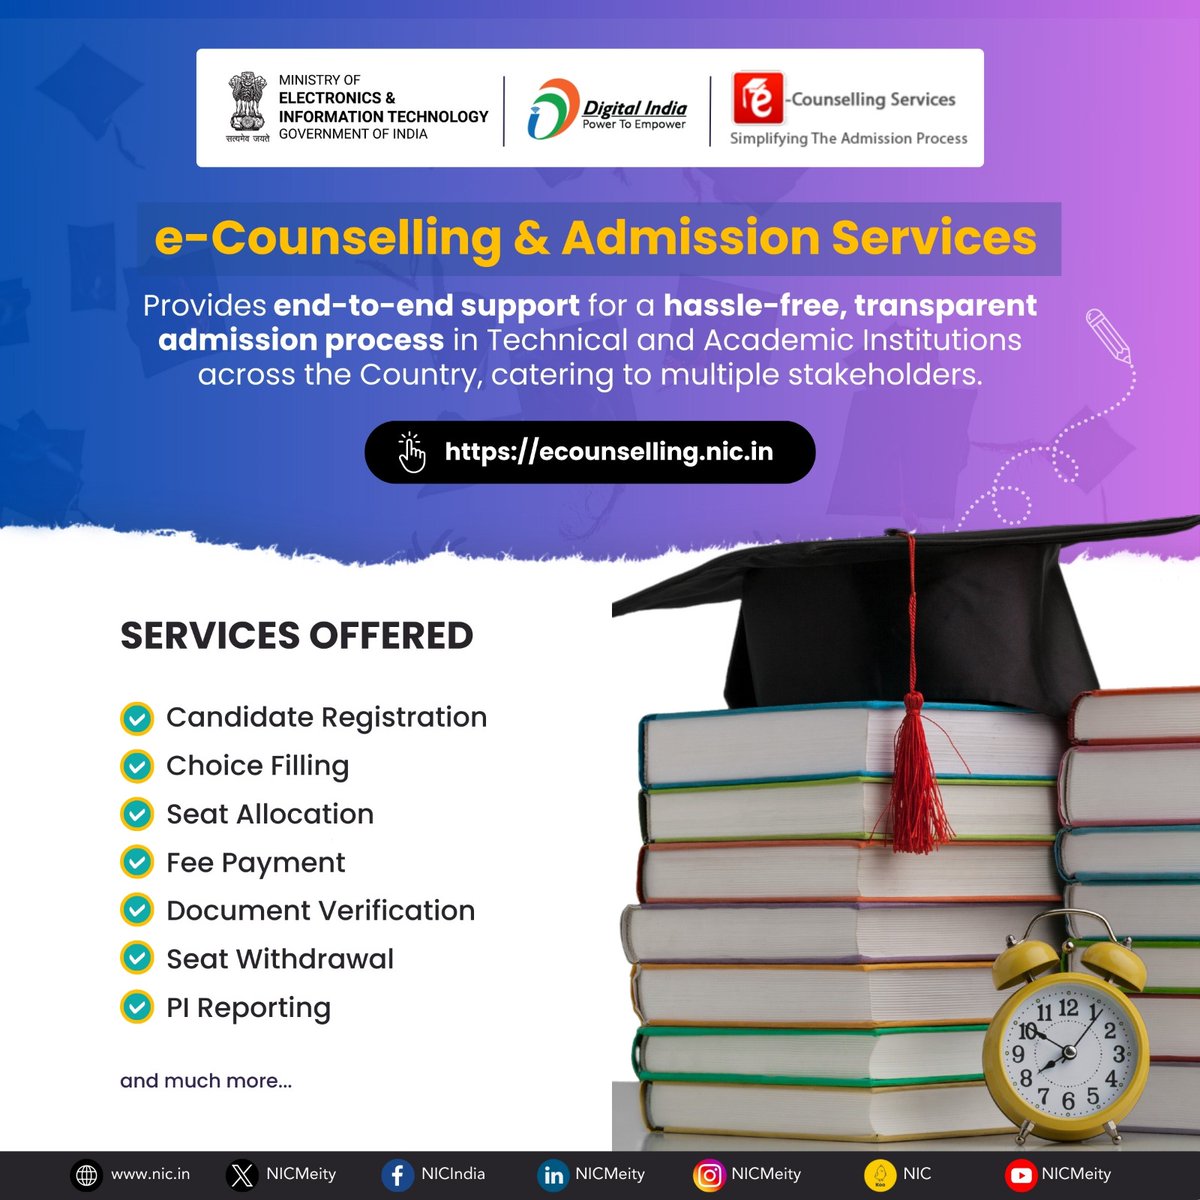 #eCounselling & #Admission Services by @NICMeity provide comprehensive technical support and services to ensure a seamless and transparent e-Counselling & Admission process in technical and academic institutions across the nation. #NICMeitY #EducationForAll #DigitalIndia